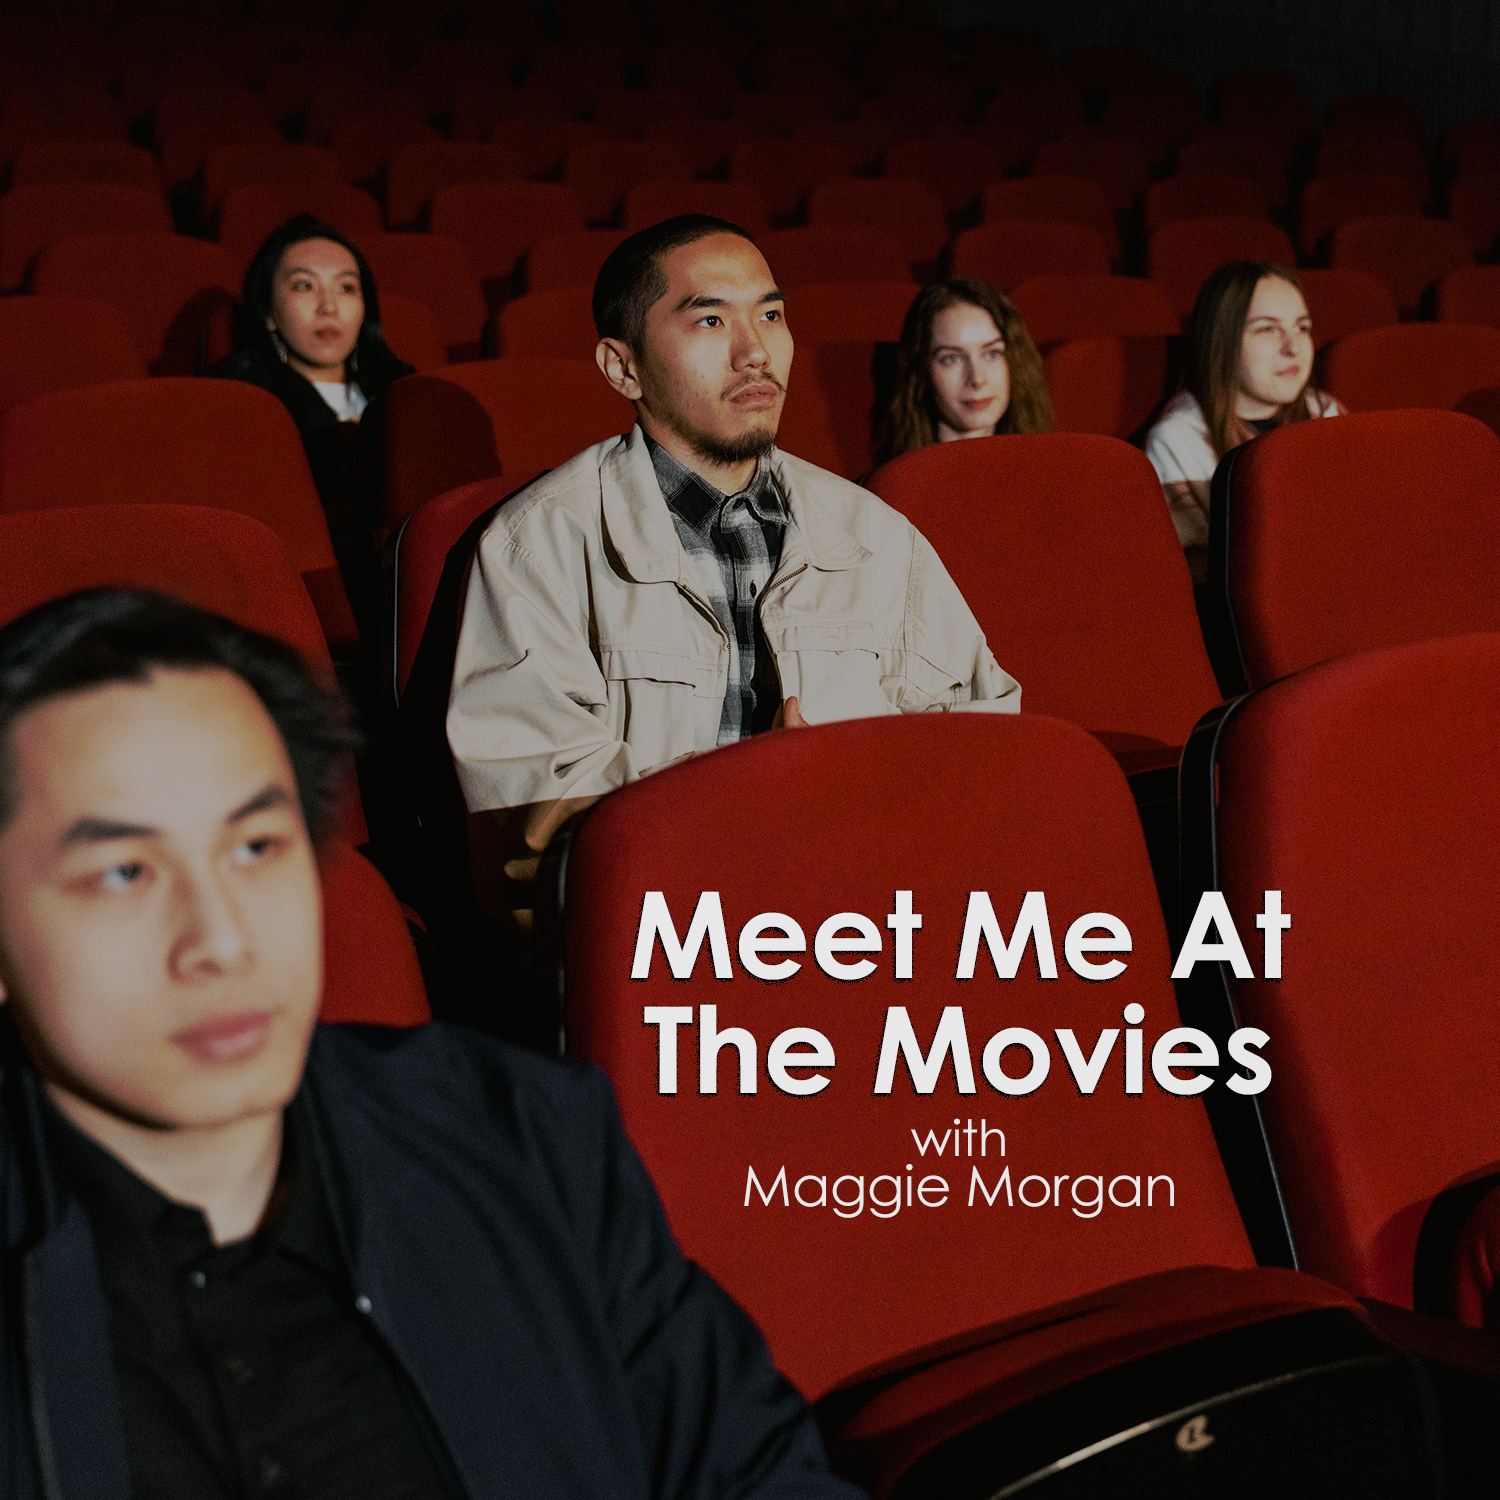 Meet Me At The Movies